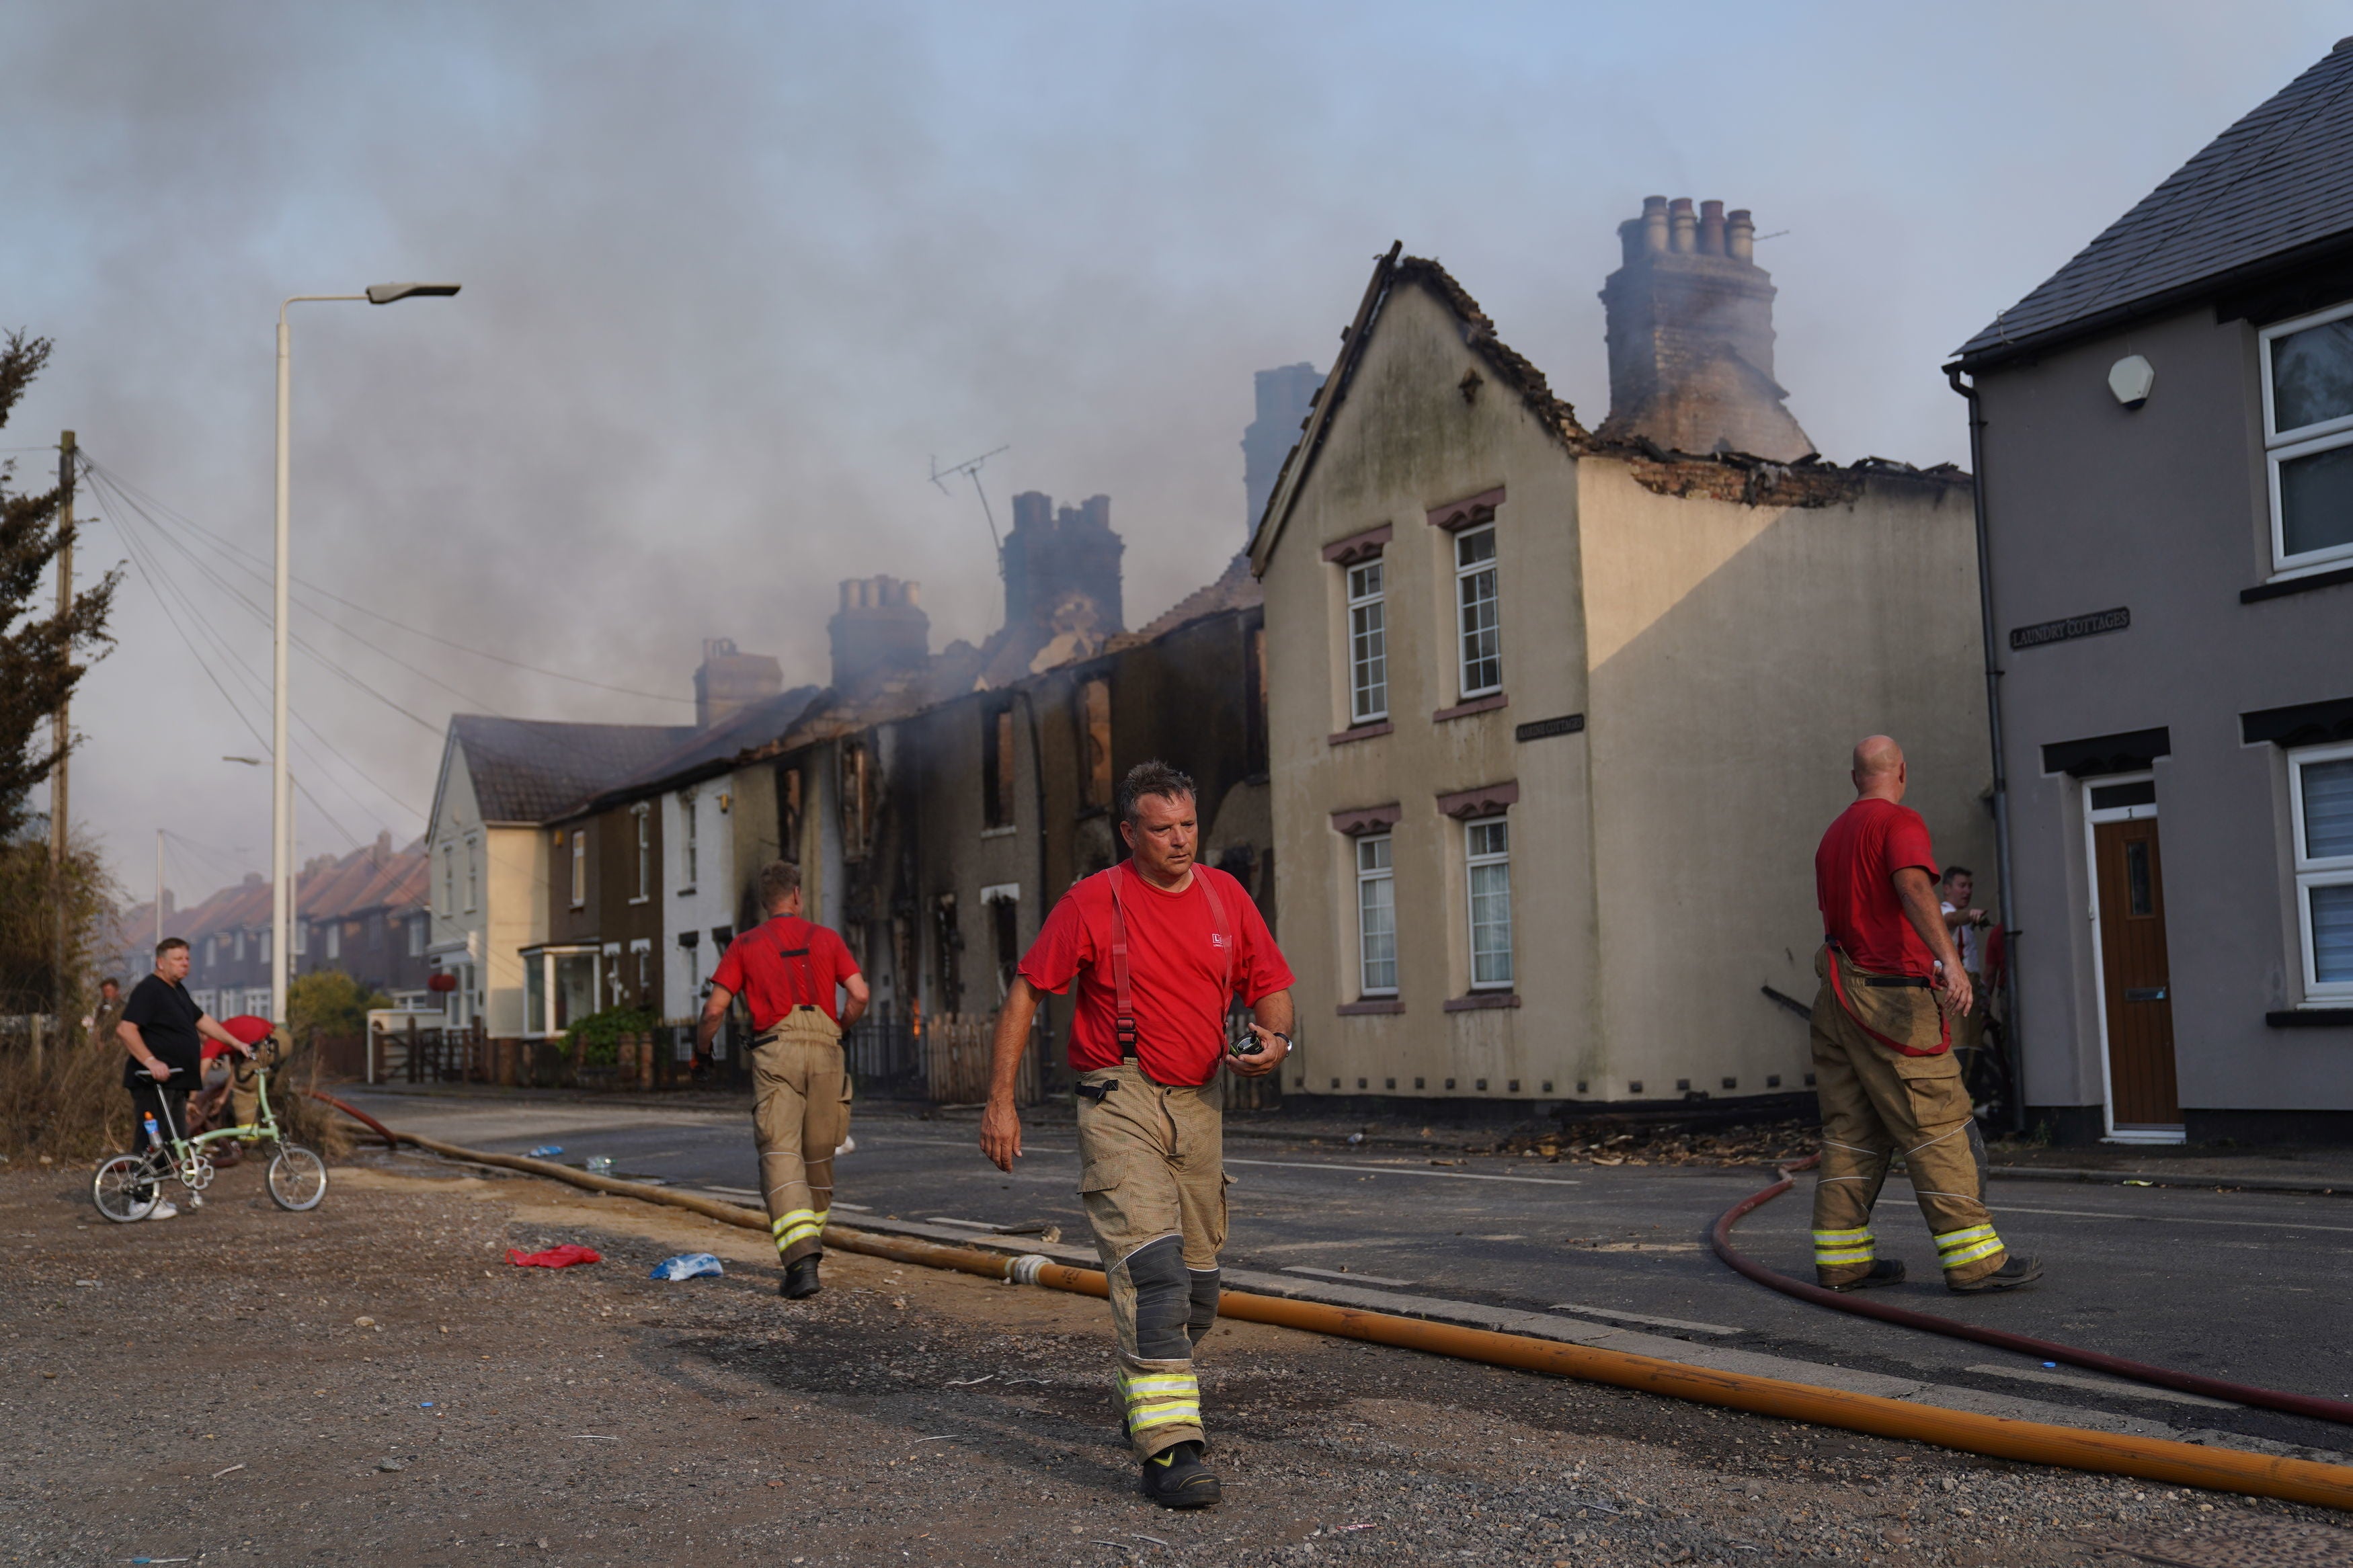 Houses were destroyed during a fire in Wennington last month